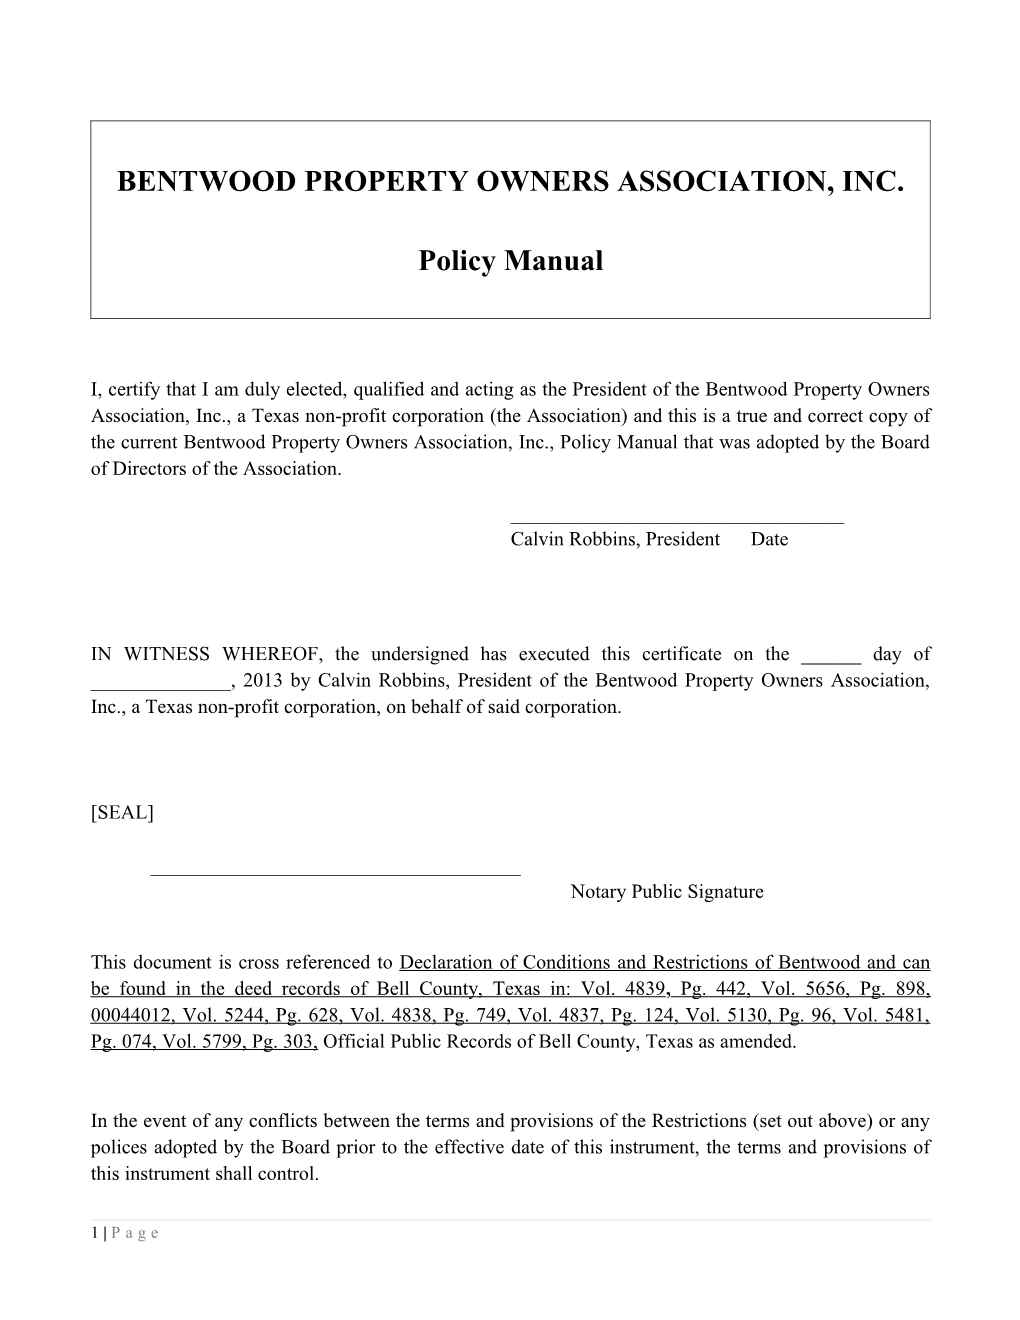 Bentwood Property Owners Association, Inc